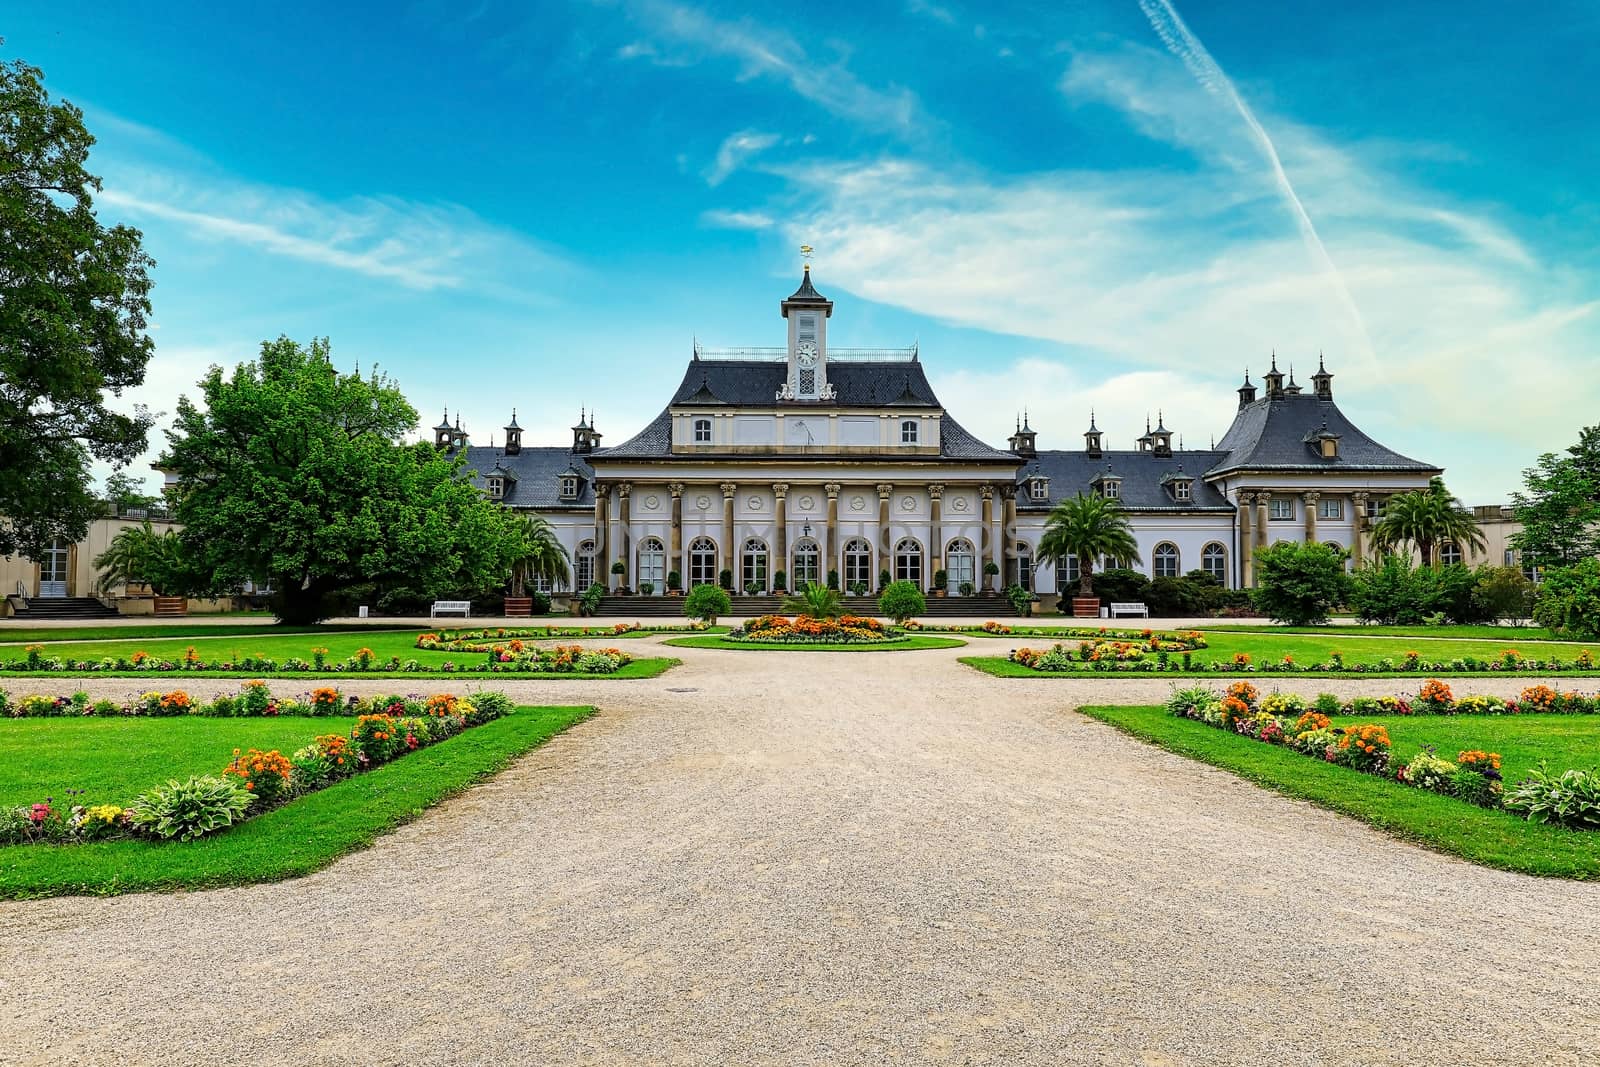 The New Palace in Pillnitz Castle near Dresden, Germany, Europe